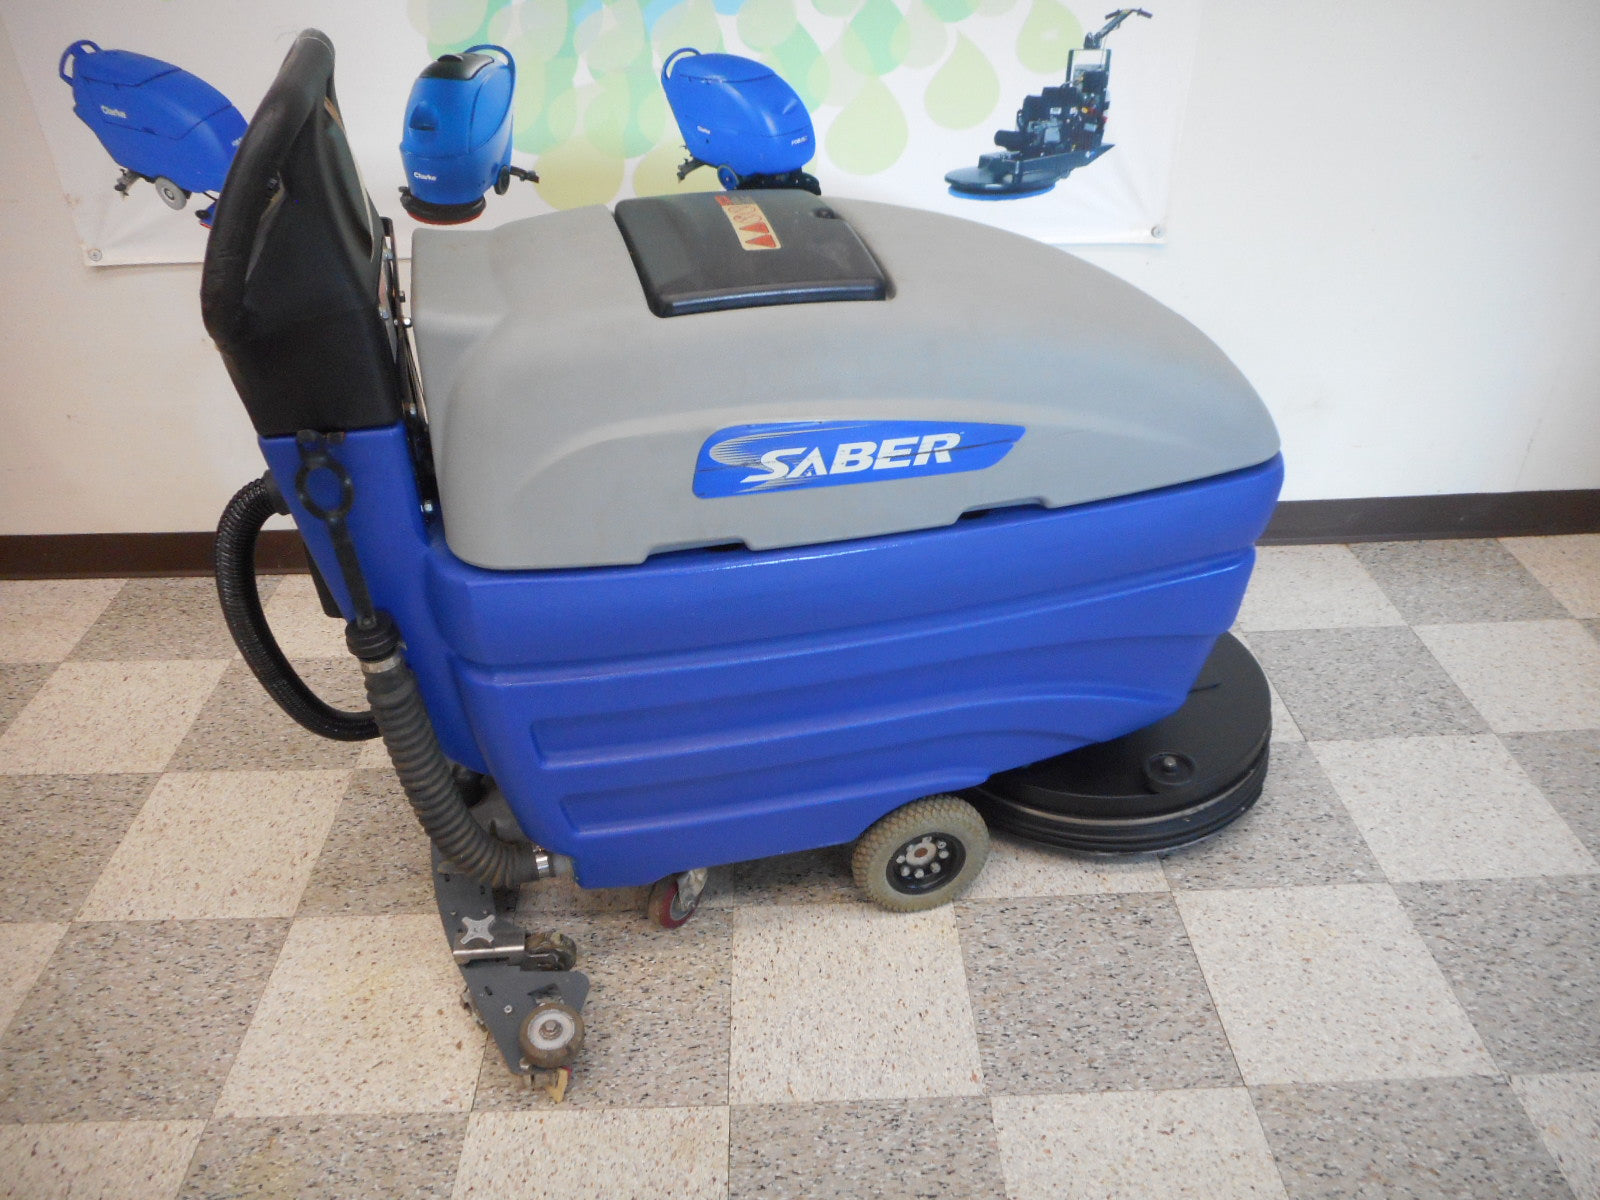 Reconditioned Windsor Saber 20 Floor Scrubber Self Propelled Scx20t